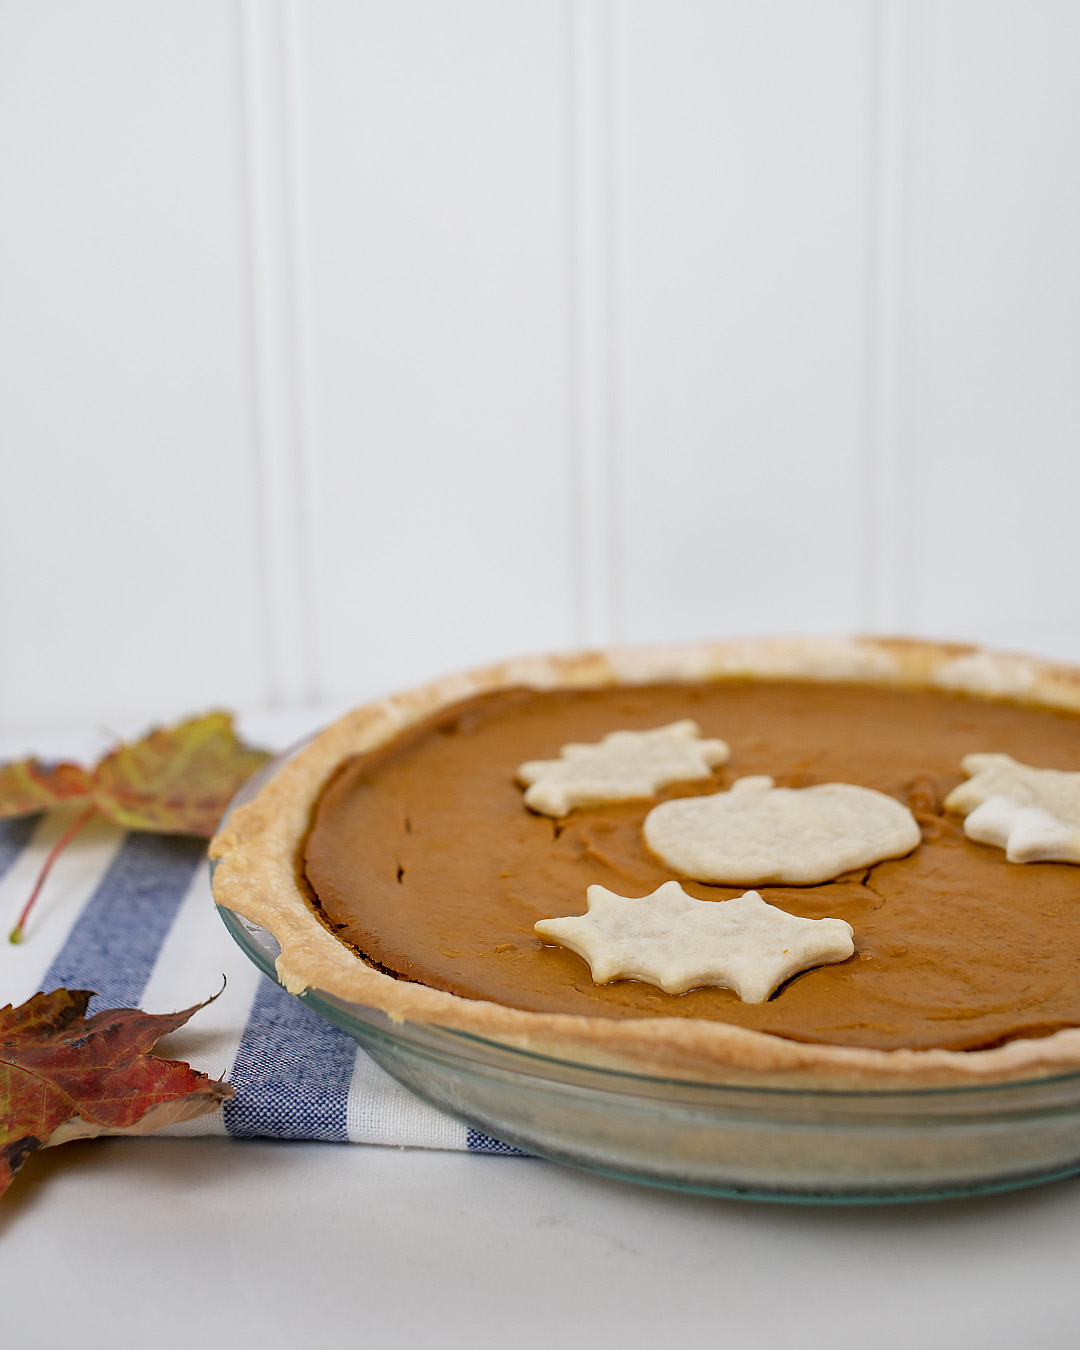 Pumpkin pie is a fall necessity and no one should do without! Here's my recipe for perfect plant-based pumpkin pie.